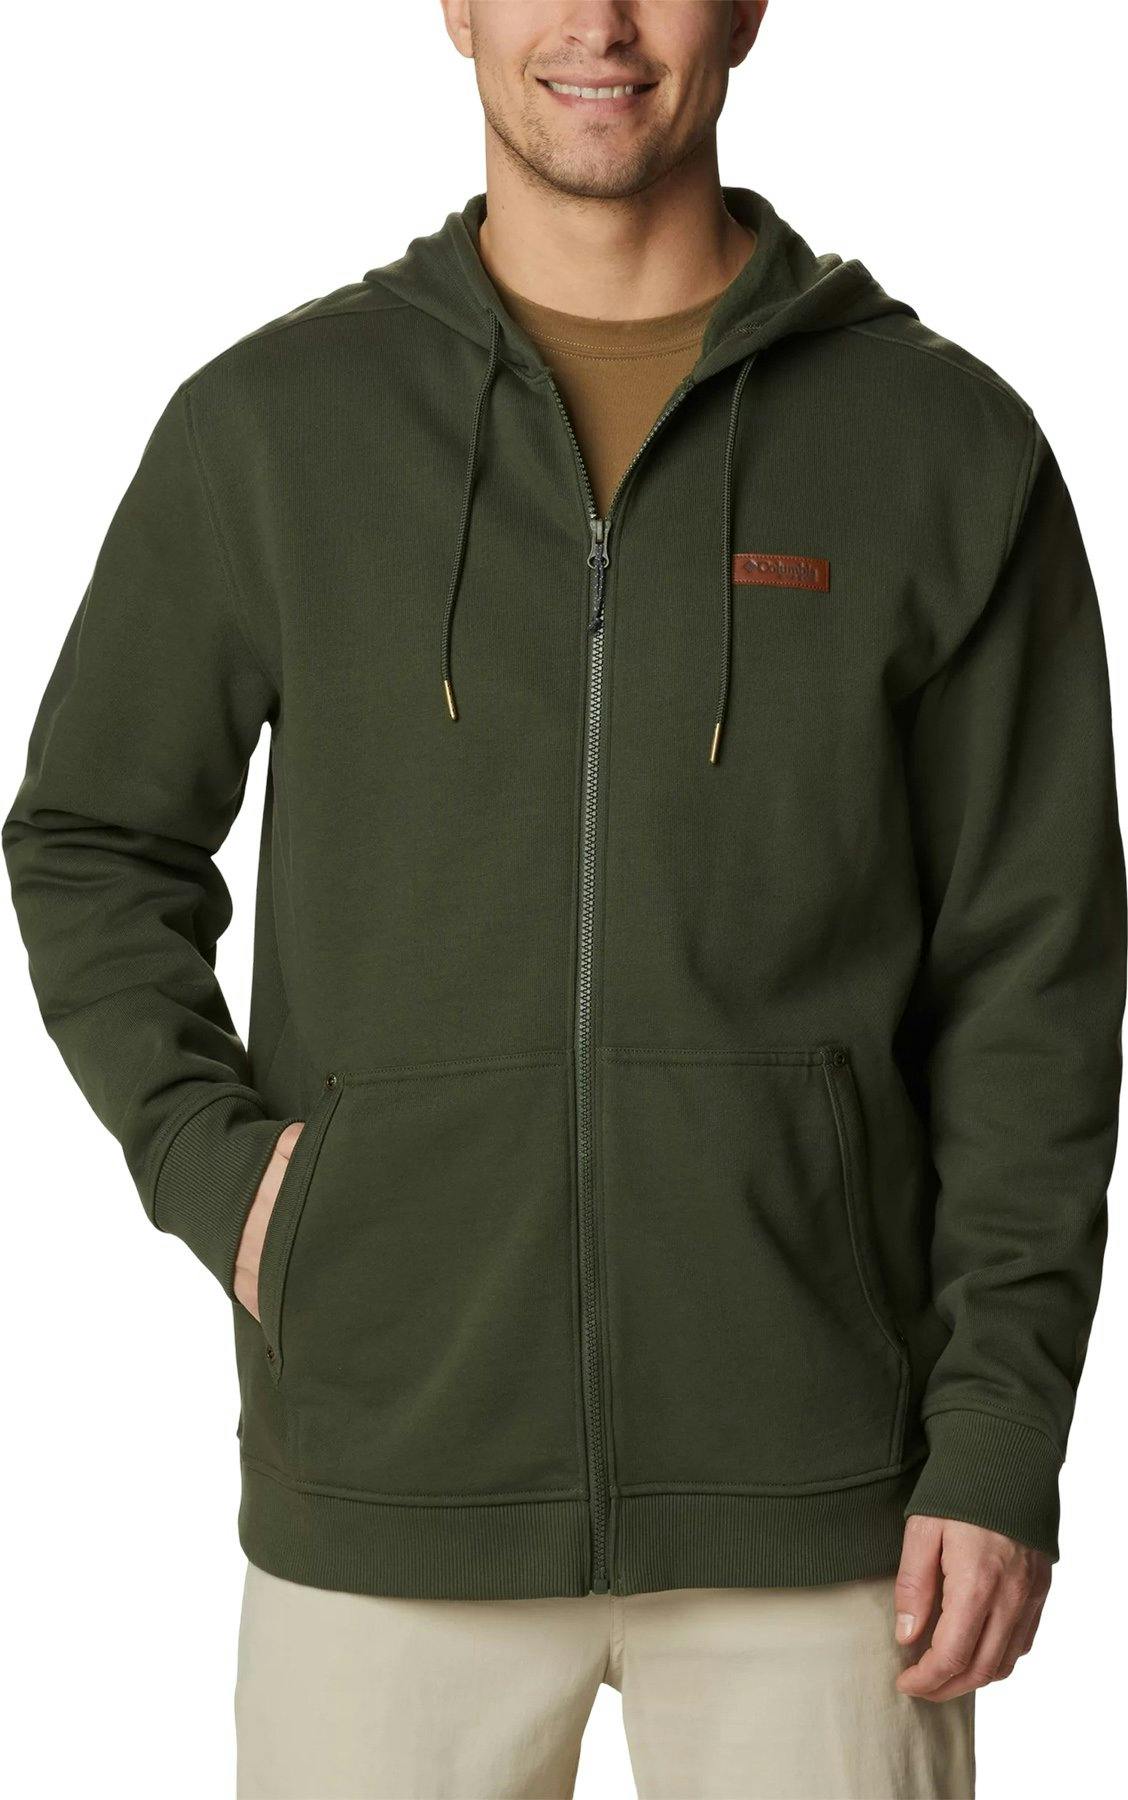 Product image for PHG Roughtail Full Zip Hoodie - Men's